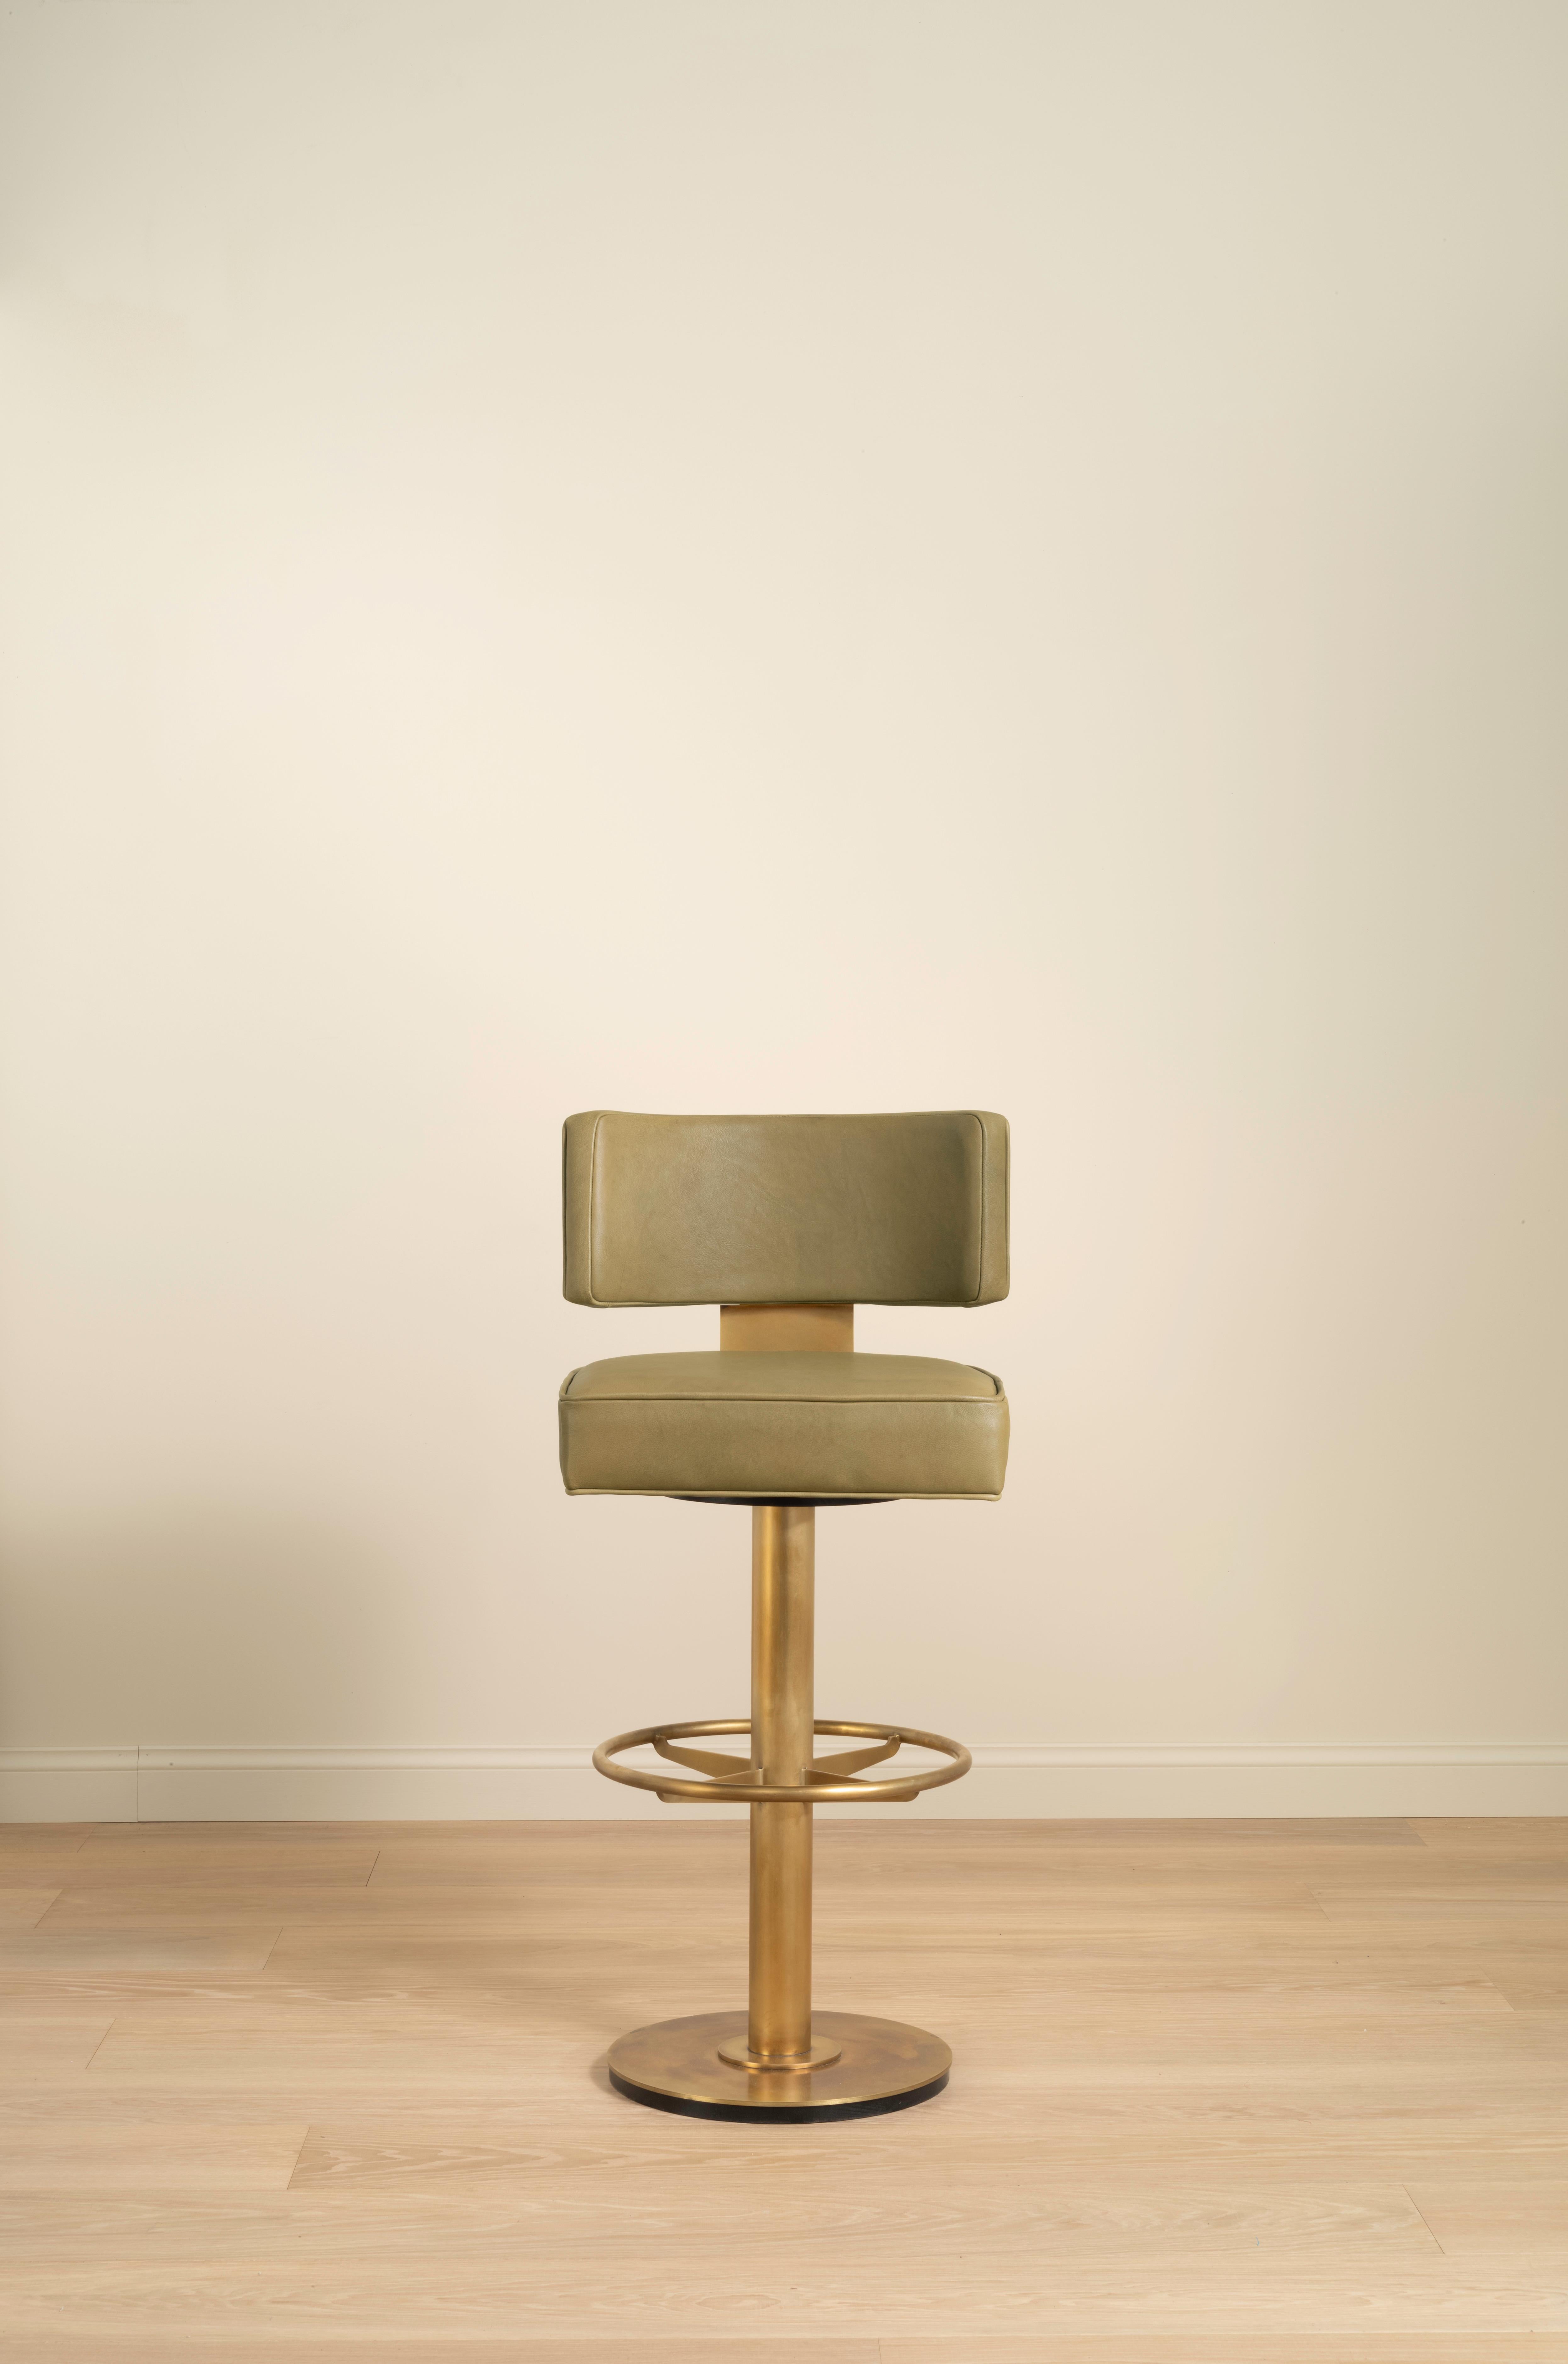 The Lafon barstool reworks the original design for the bar setting. Crafted with a patinated brass finish pedestal and backsplat, and generous upholstered seat, complete with a bespoke swivel mechanism. Upholstered in clients’ own fabric and/or